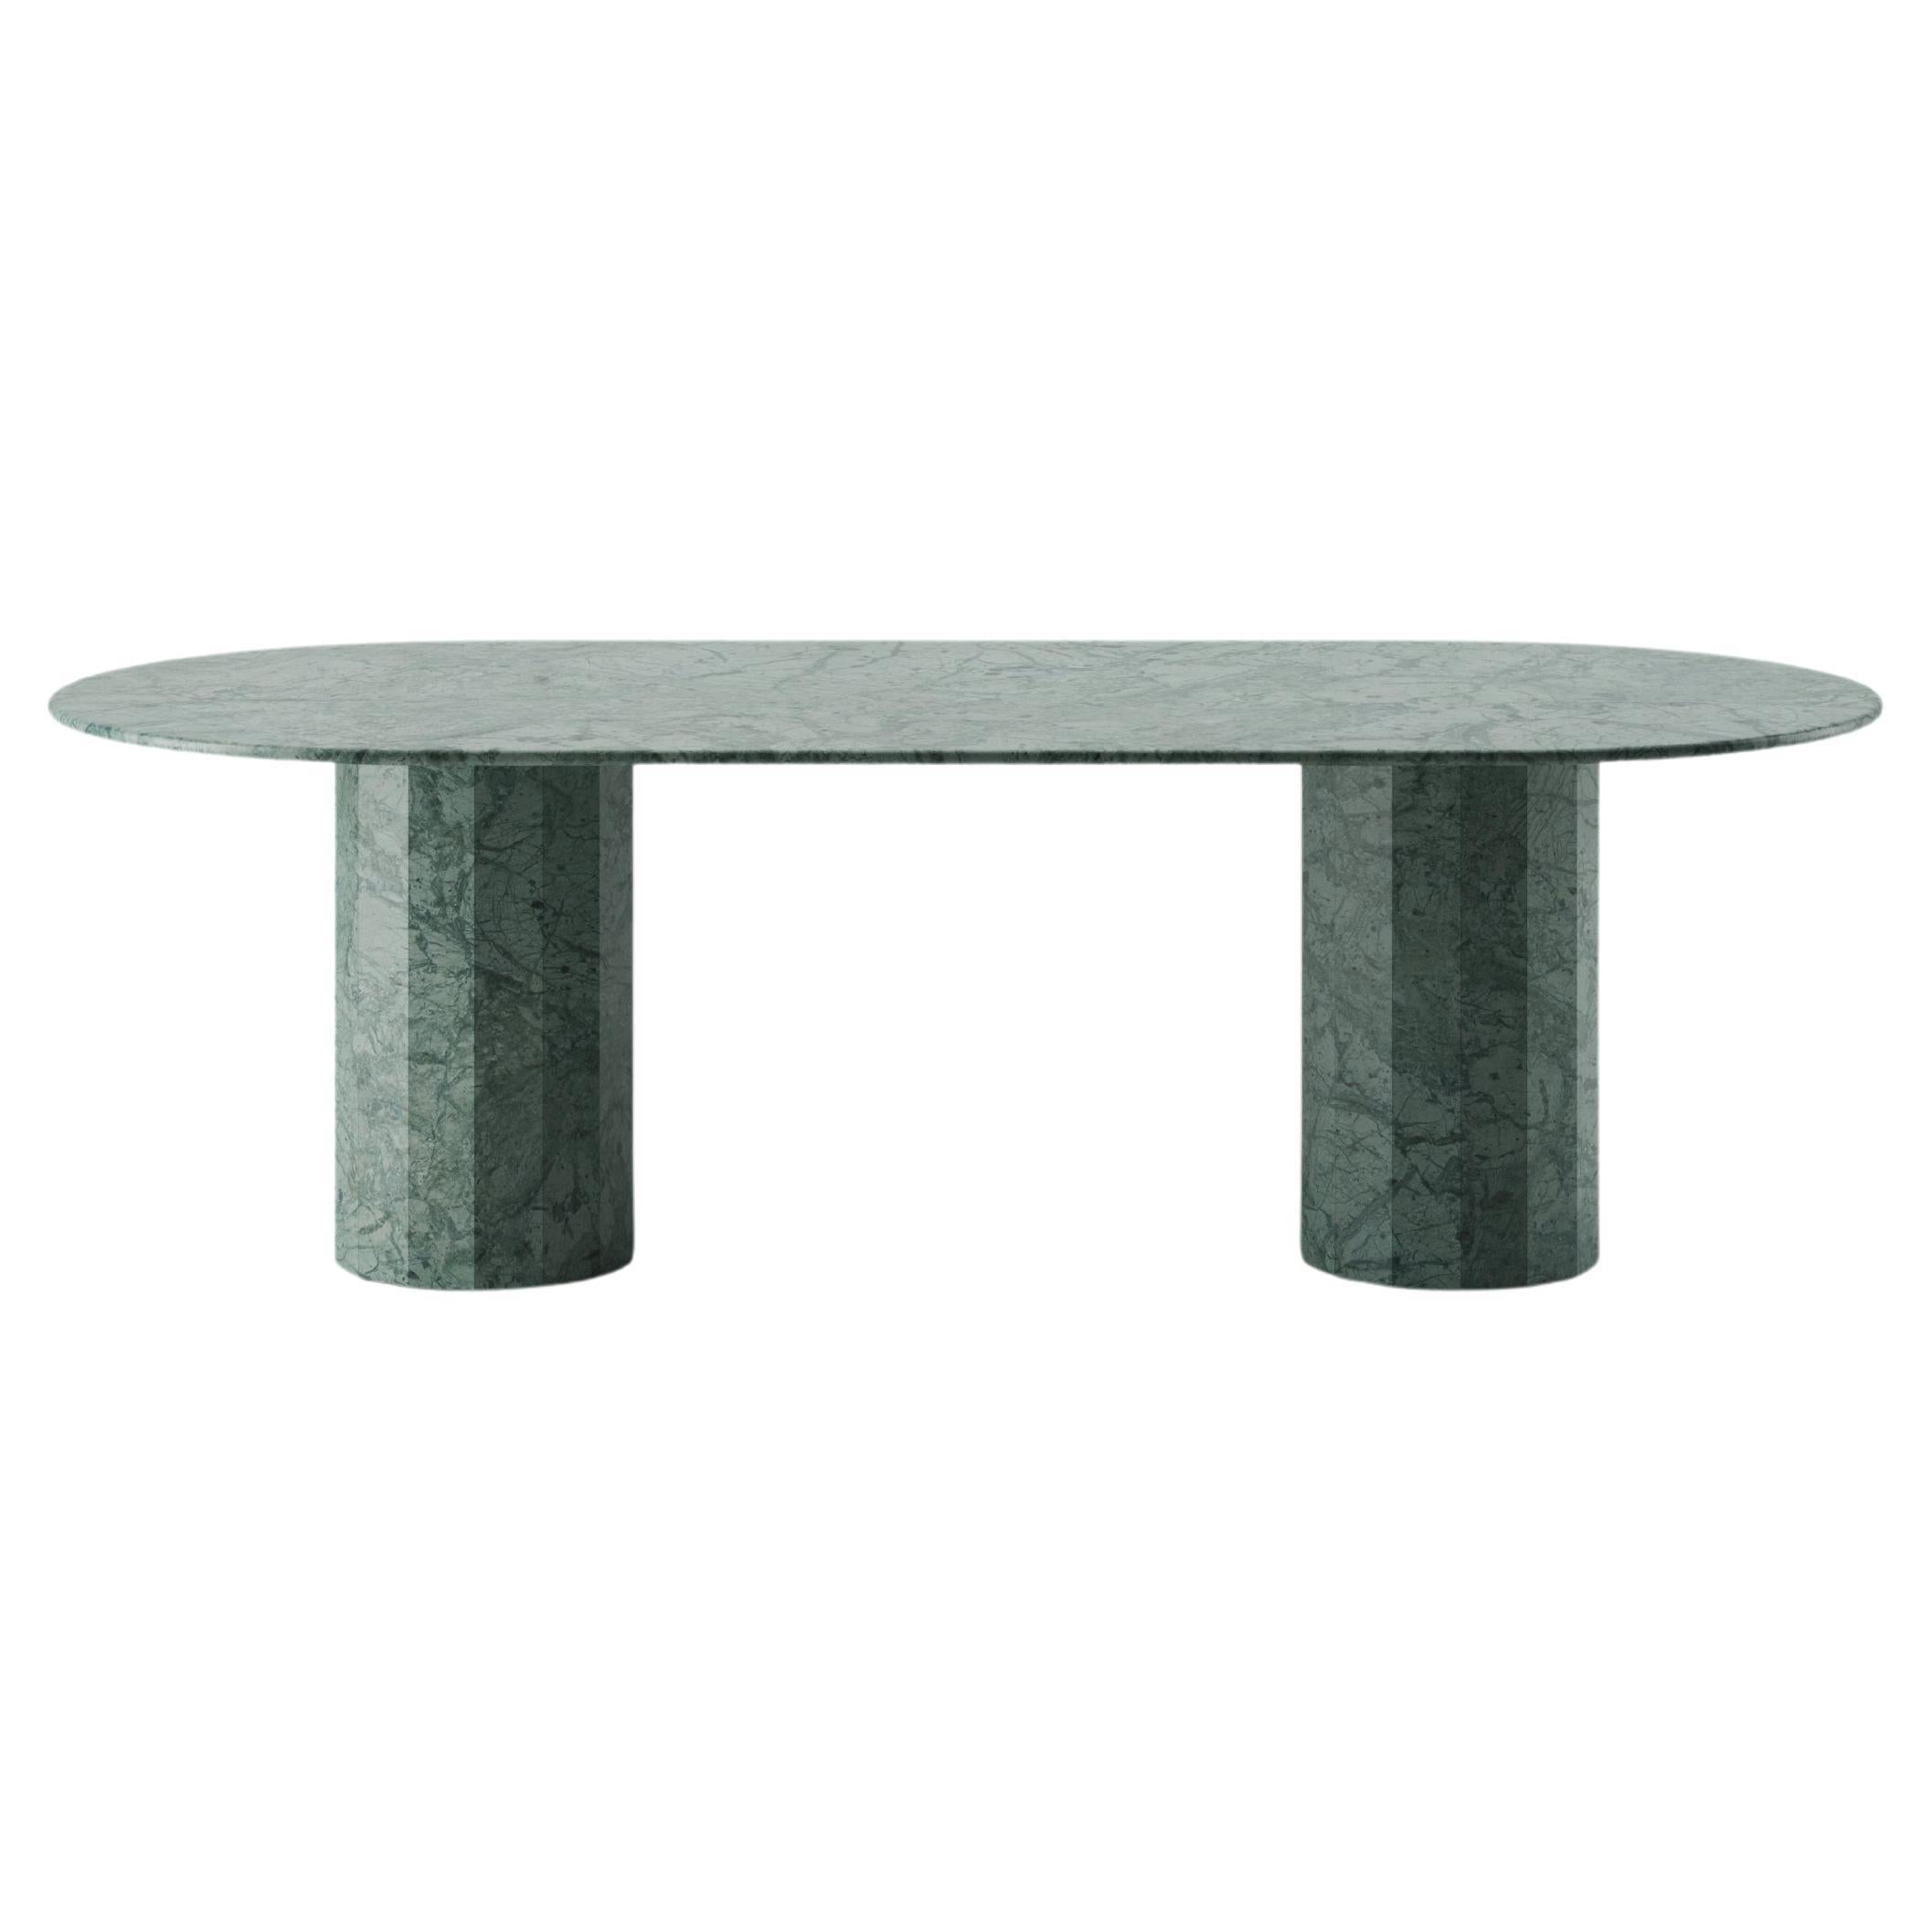 Palladian 240cm/94.4" Oval Dining Table in Verde Guatemala